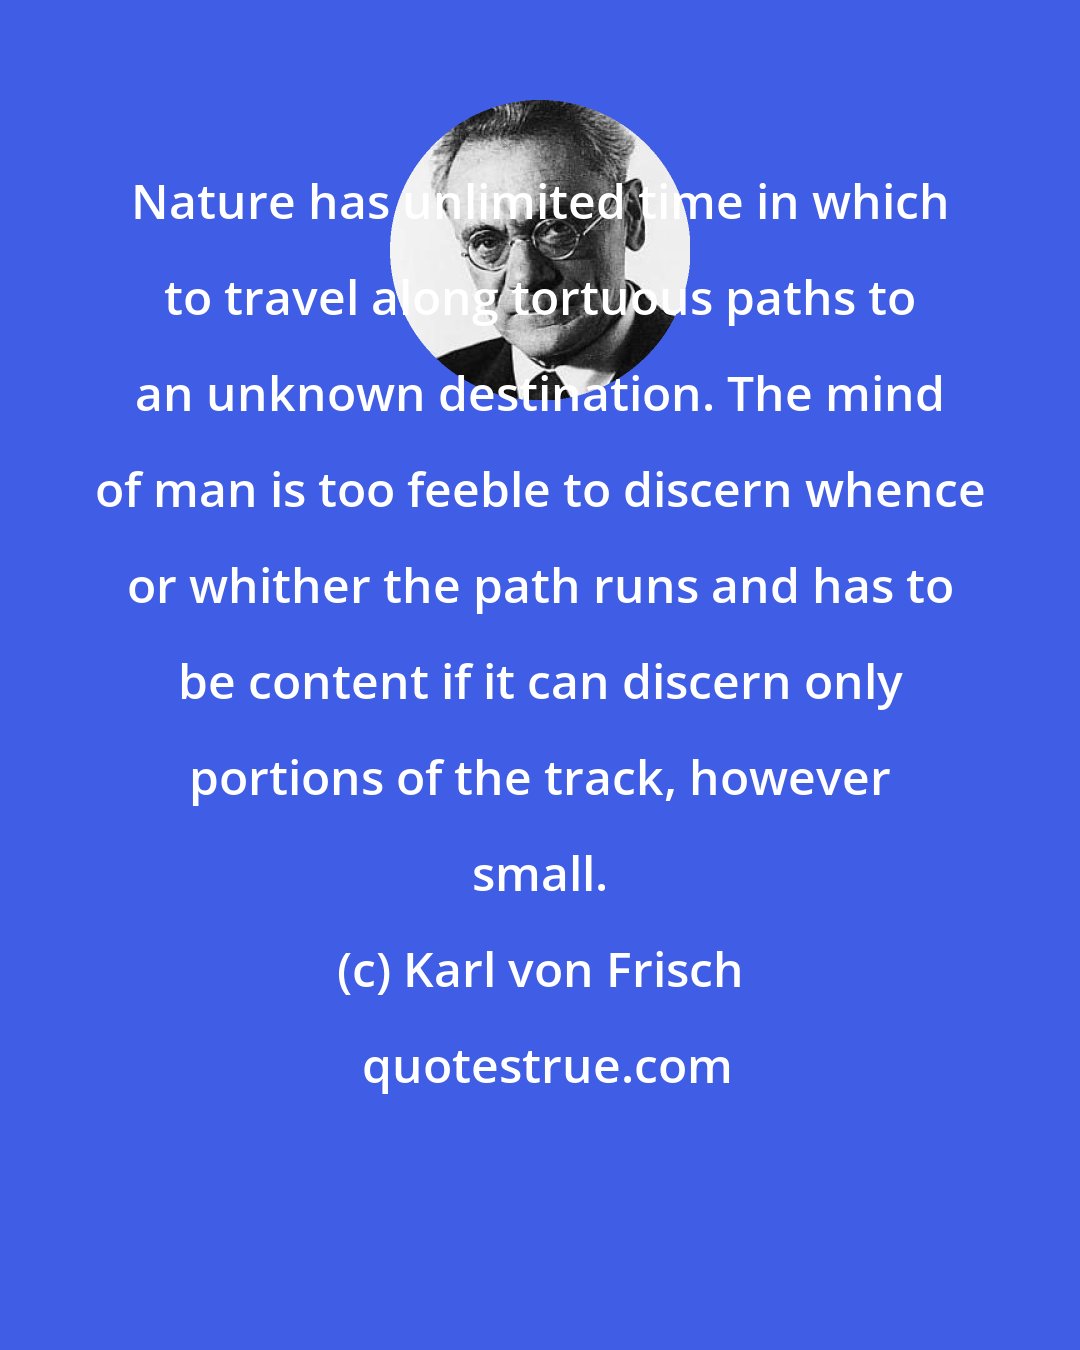 Karl von Frisch: Nature has unlimited time in which to travel along tortuous paths to an unknown destination. The mind of man is too feeble to discern whence or whither the path runs and has to be content if it can discern only portions of the track, however small.